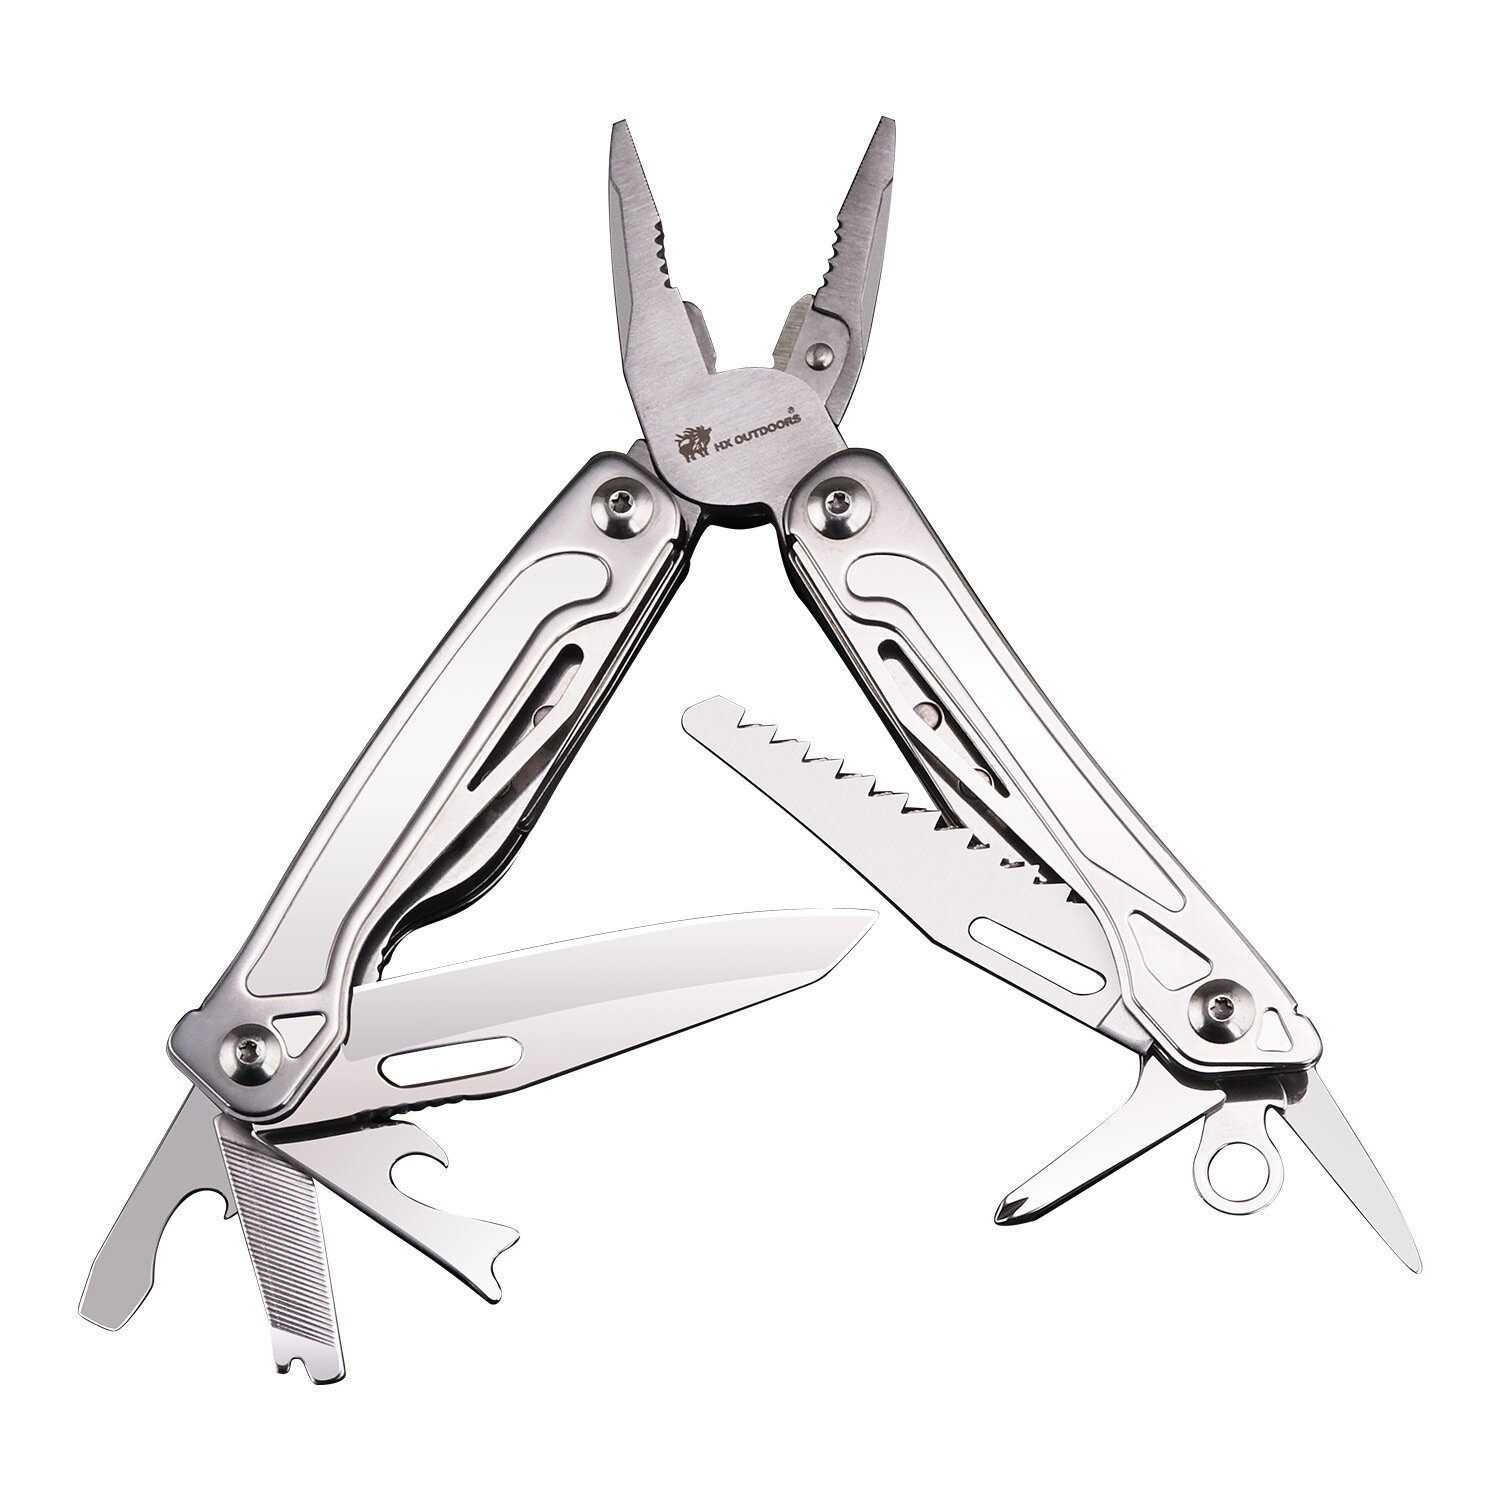 

HX OUTDOORS 14 in 1 Car Multi Lightweight Folding Pliers/ Knife /Scissors Household Outdoor Survival Camping Bicycle Fis